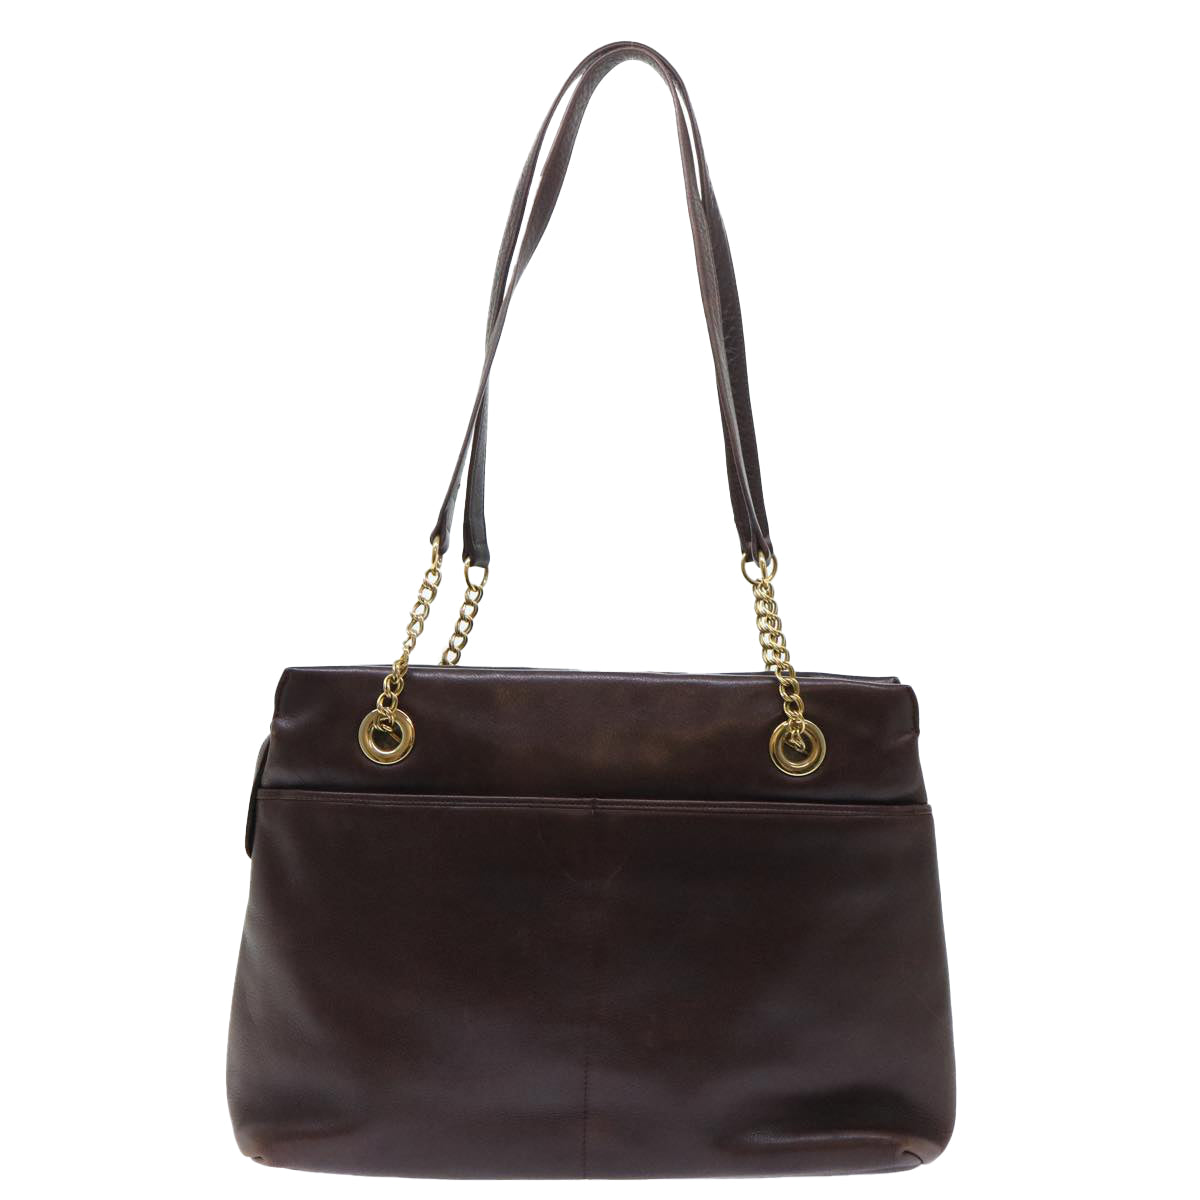 BALLY Shoulder Bag Leather Brown Auth bs7832 - 0